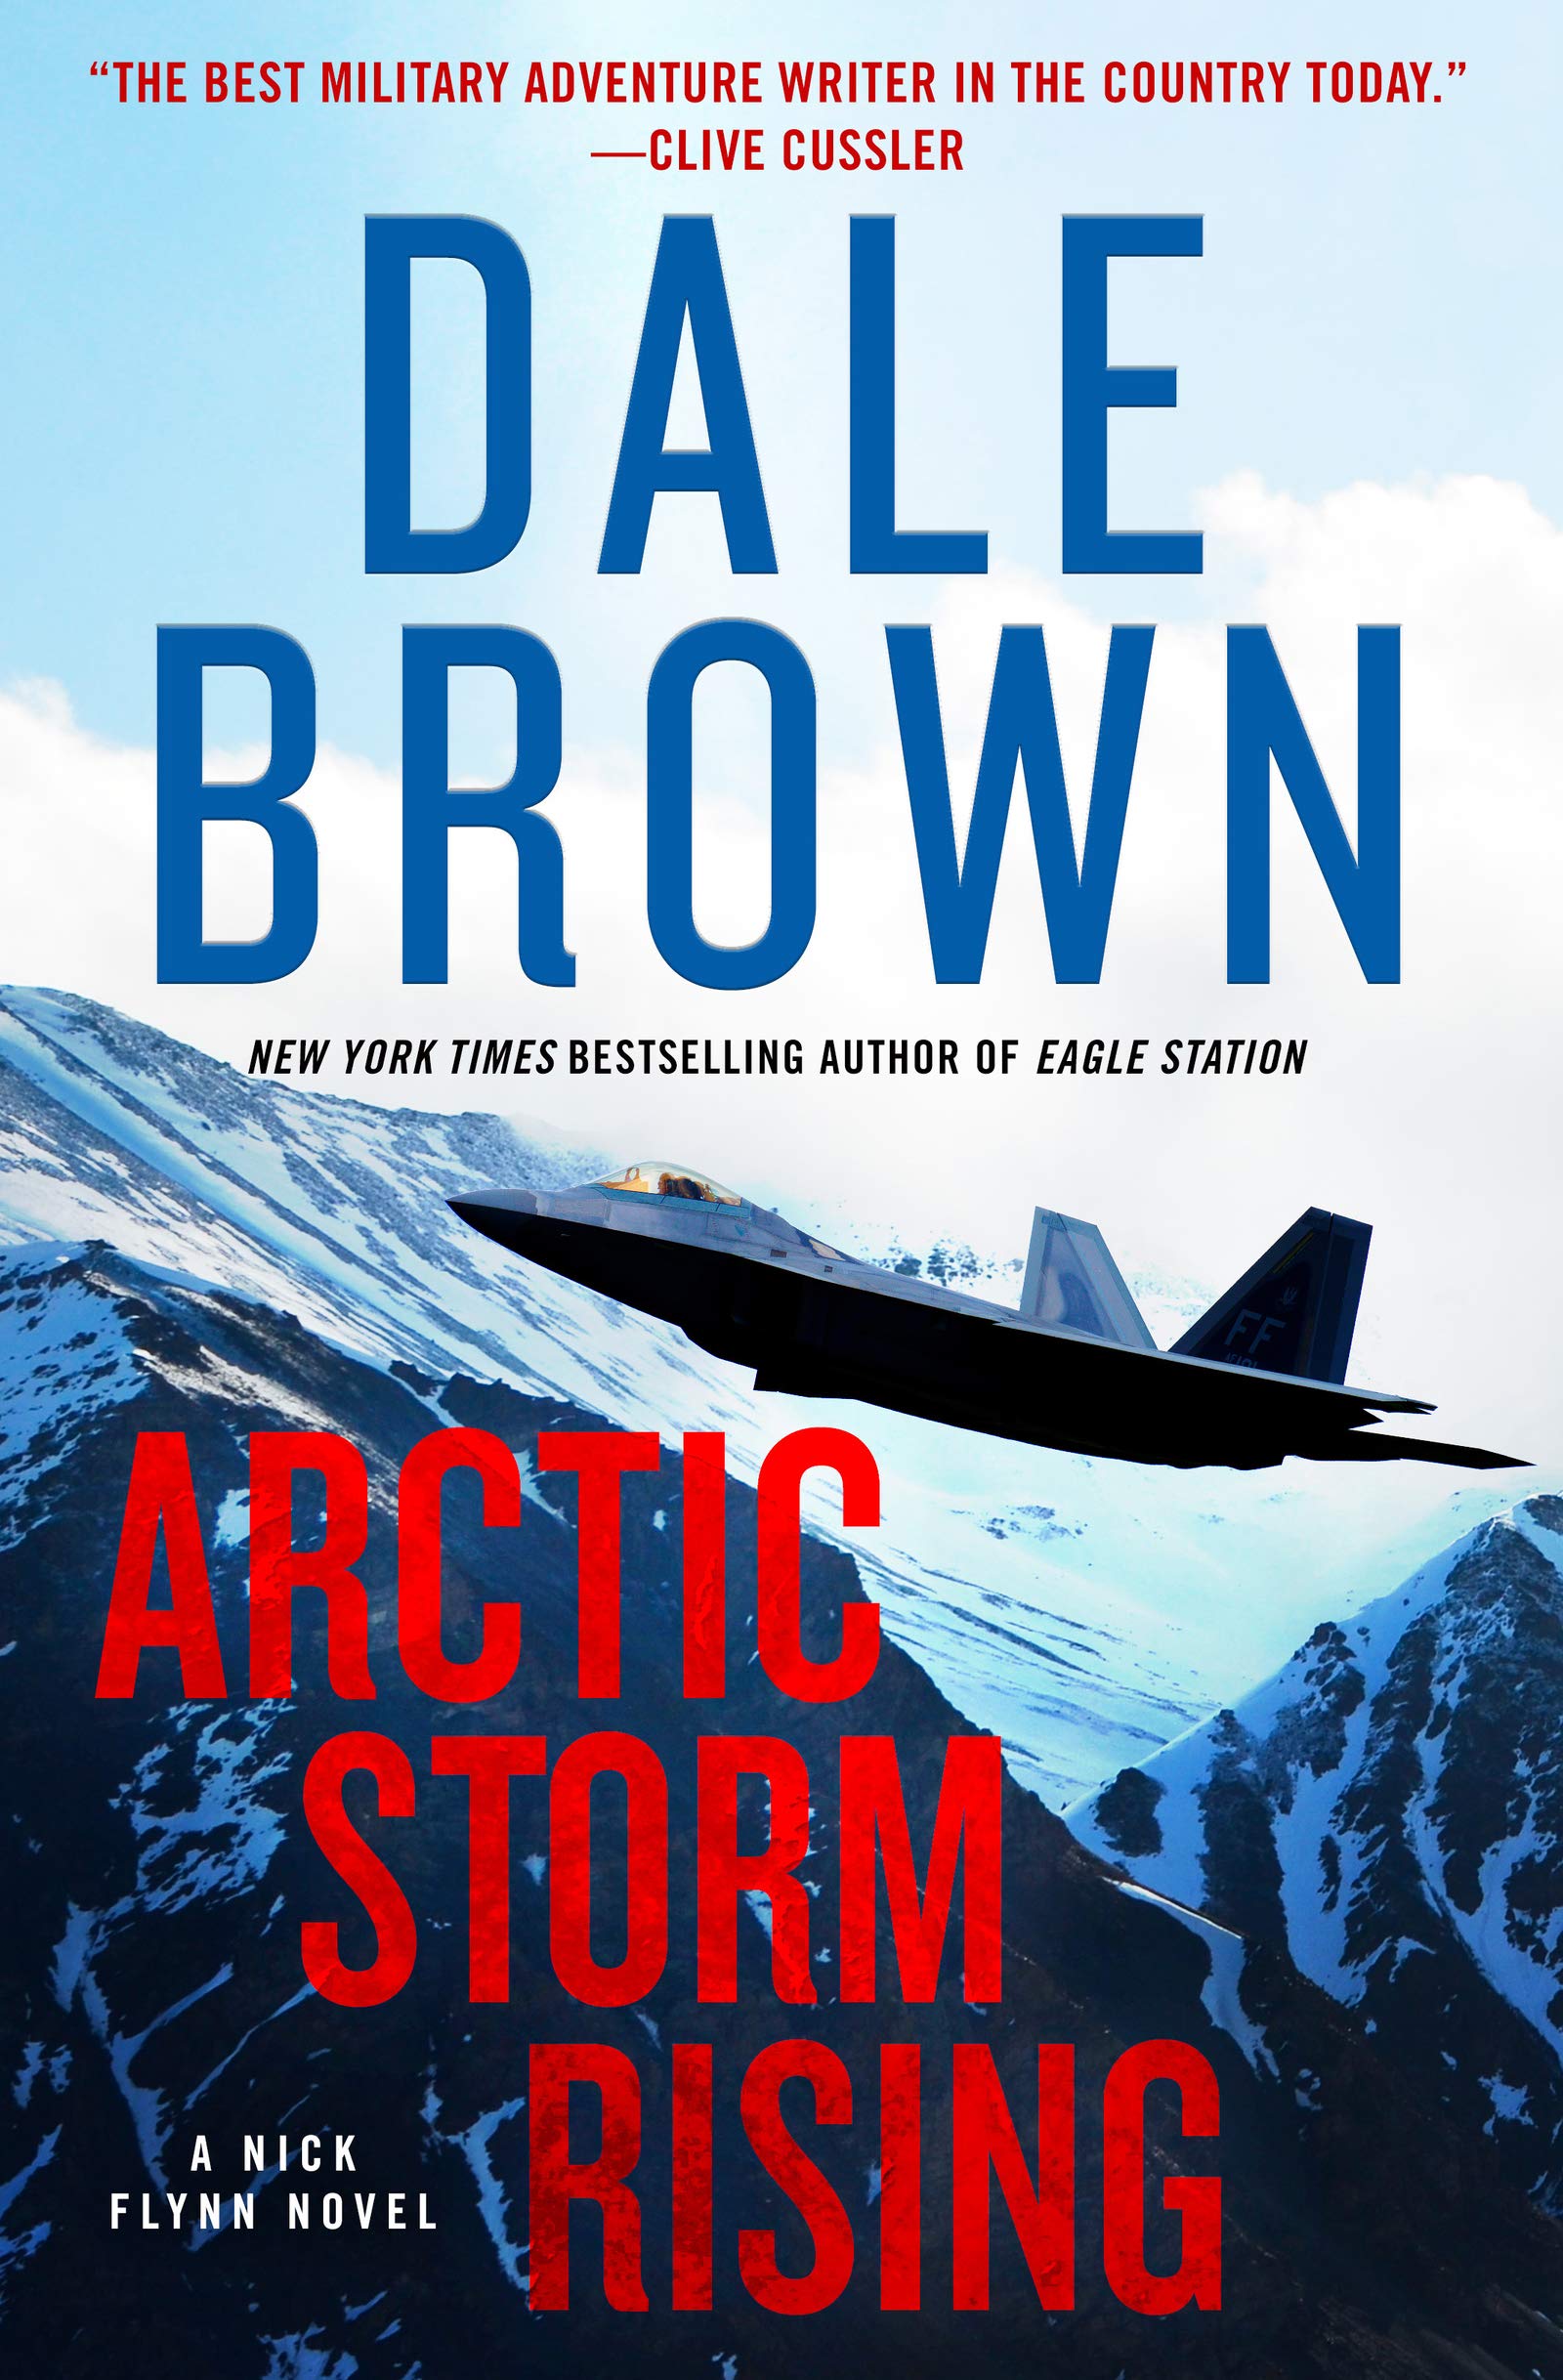 Image for "Arctic Storm Rising"